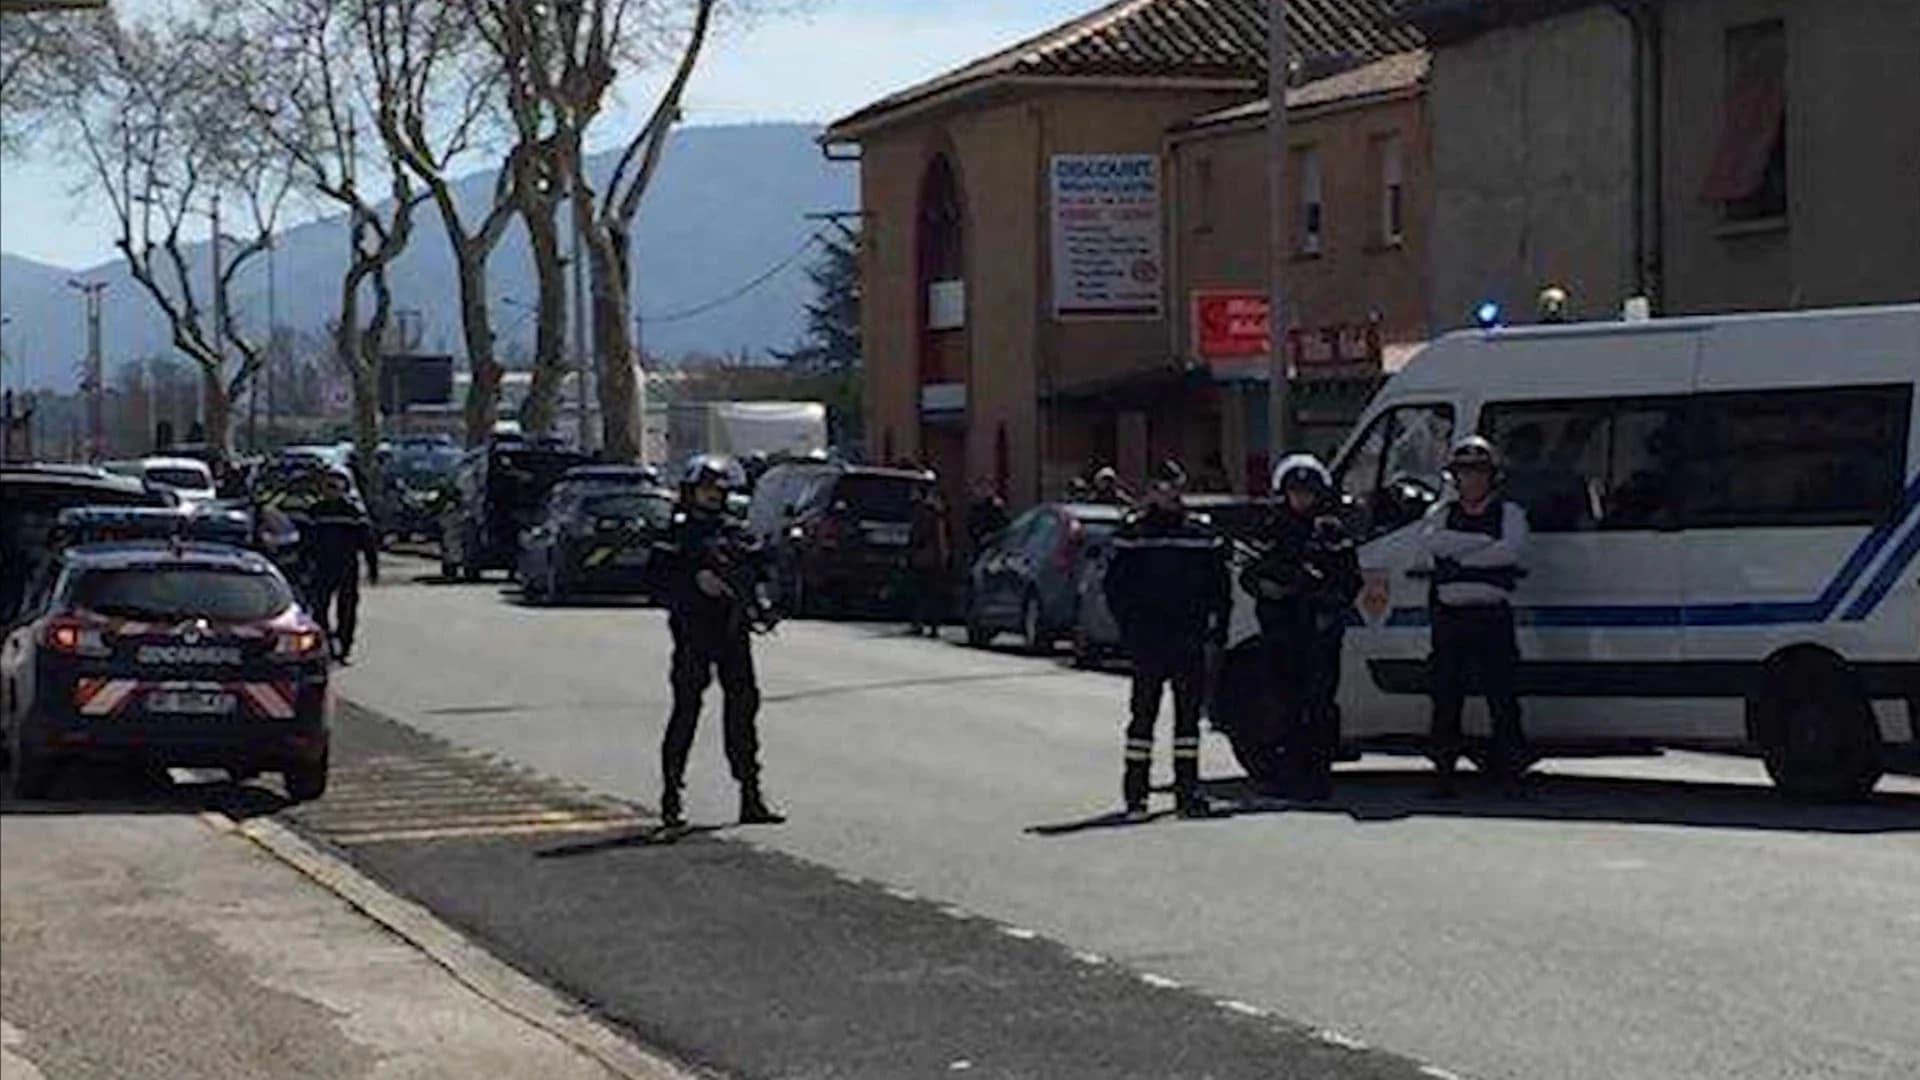 Extremist slain, 3 dead after rampage in southern France